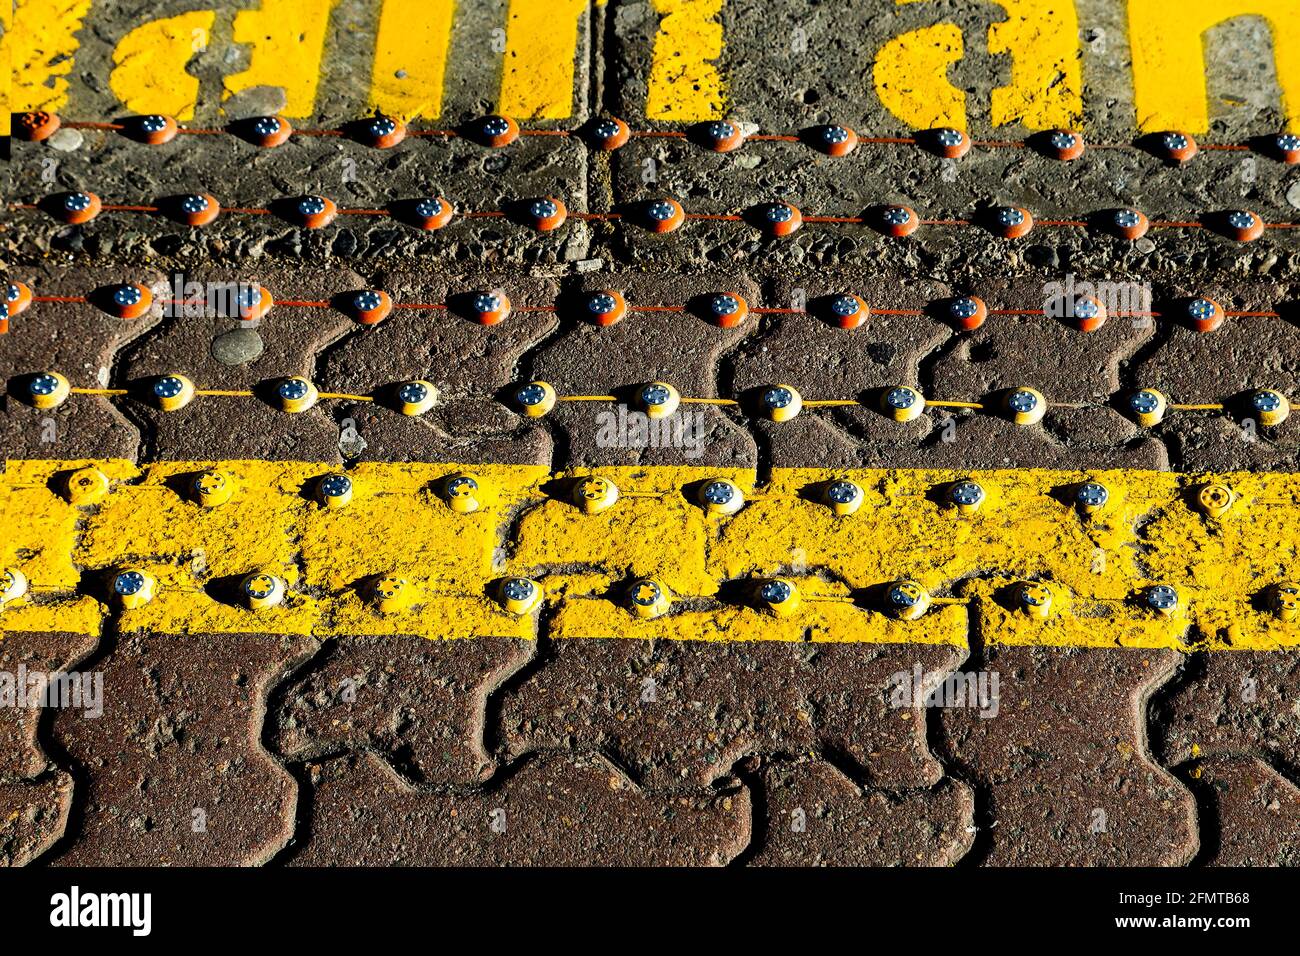 Looking down at studs and warning markings on the edge of a platform in a train station. Stock Photo